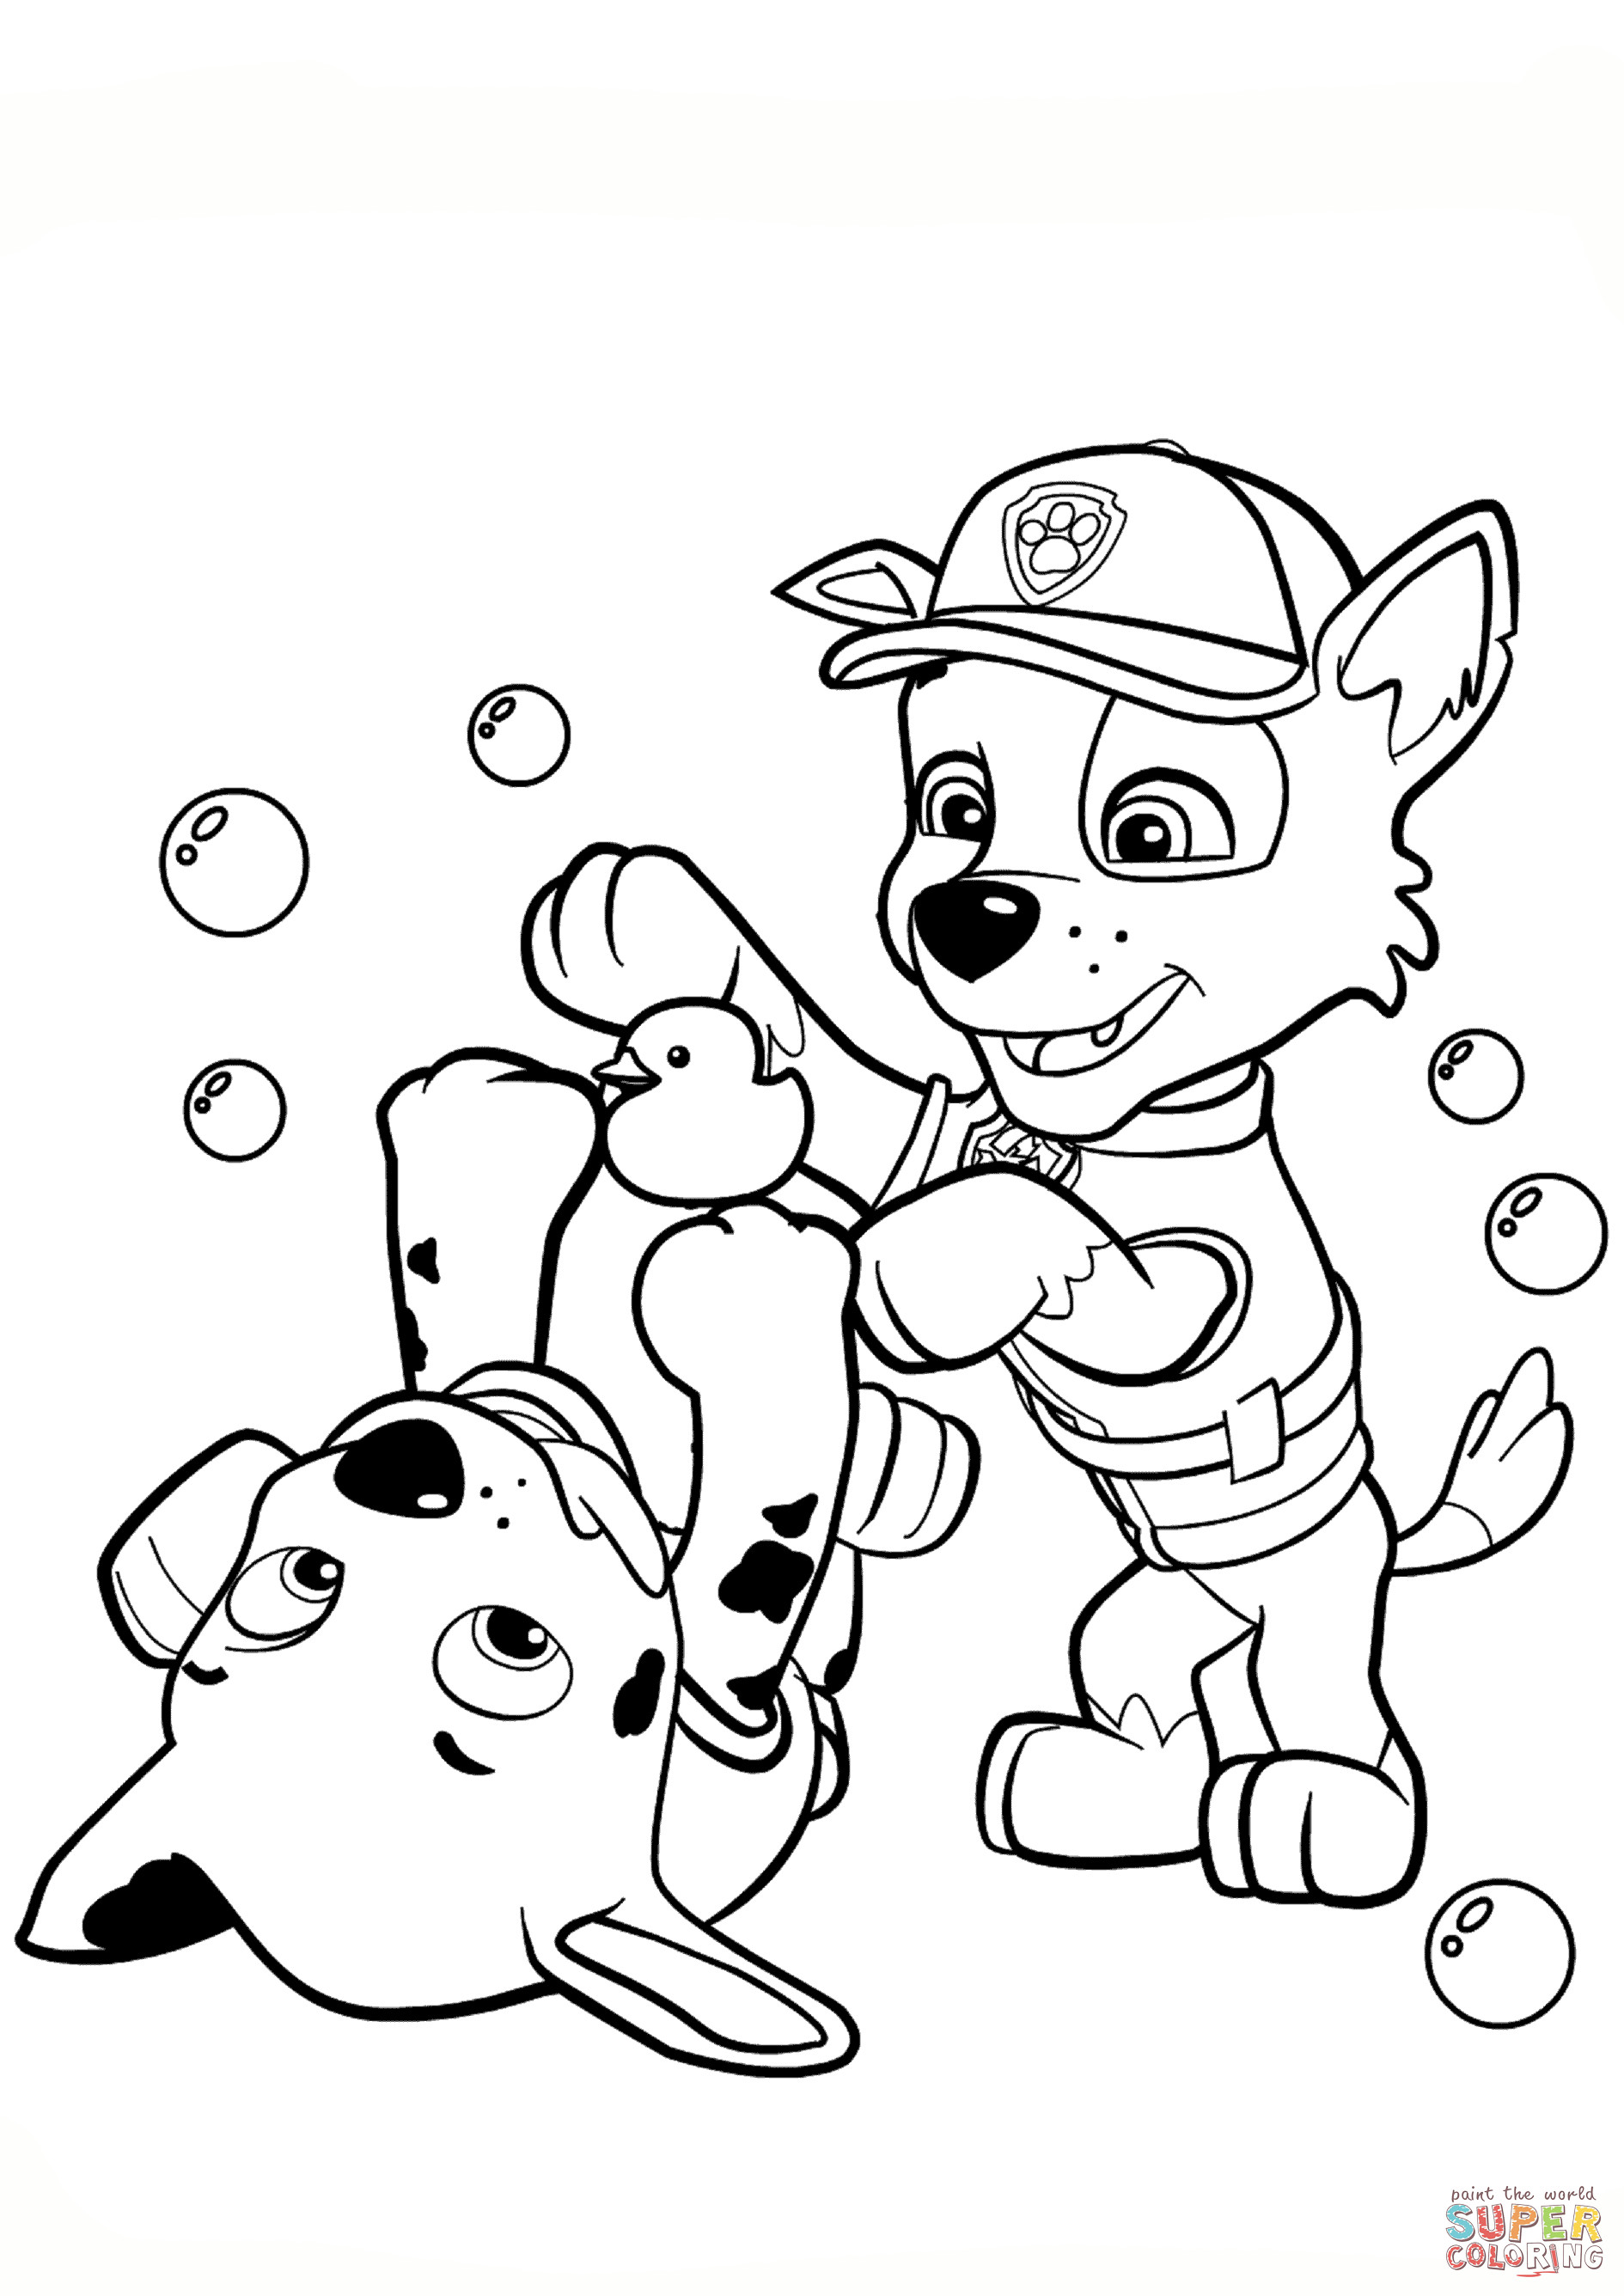 Paw Patrol Coloring Pages Marshall
 Marshal Paw Patrol Free Colouring Pages